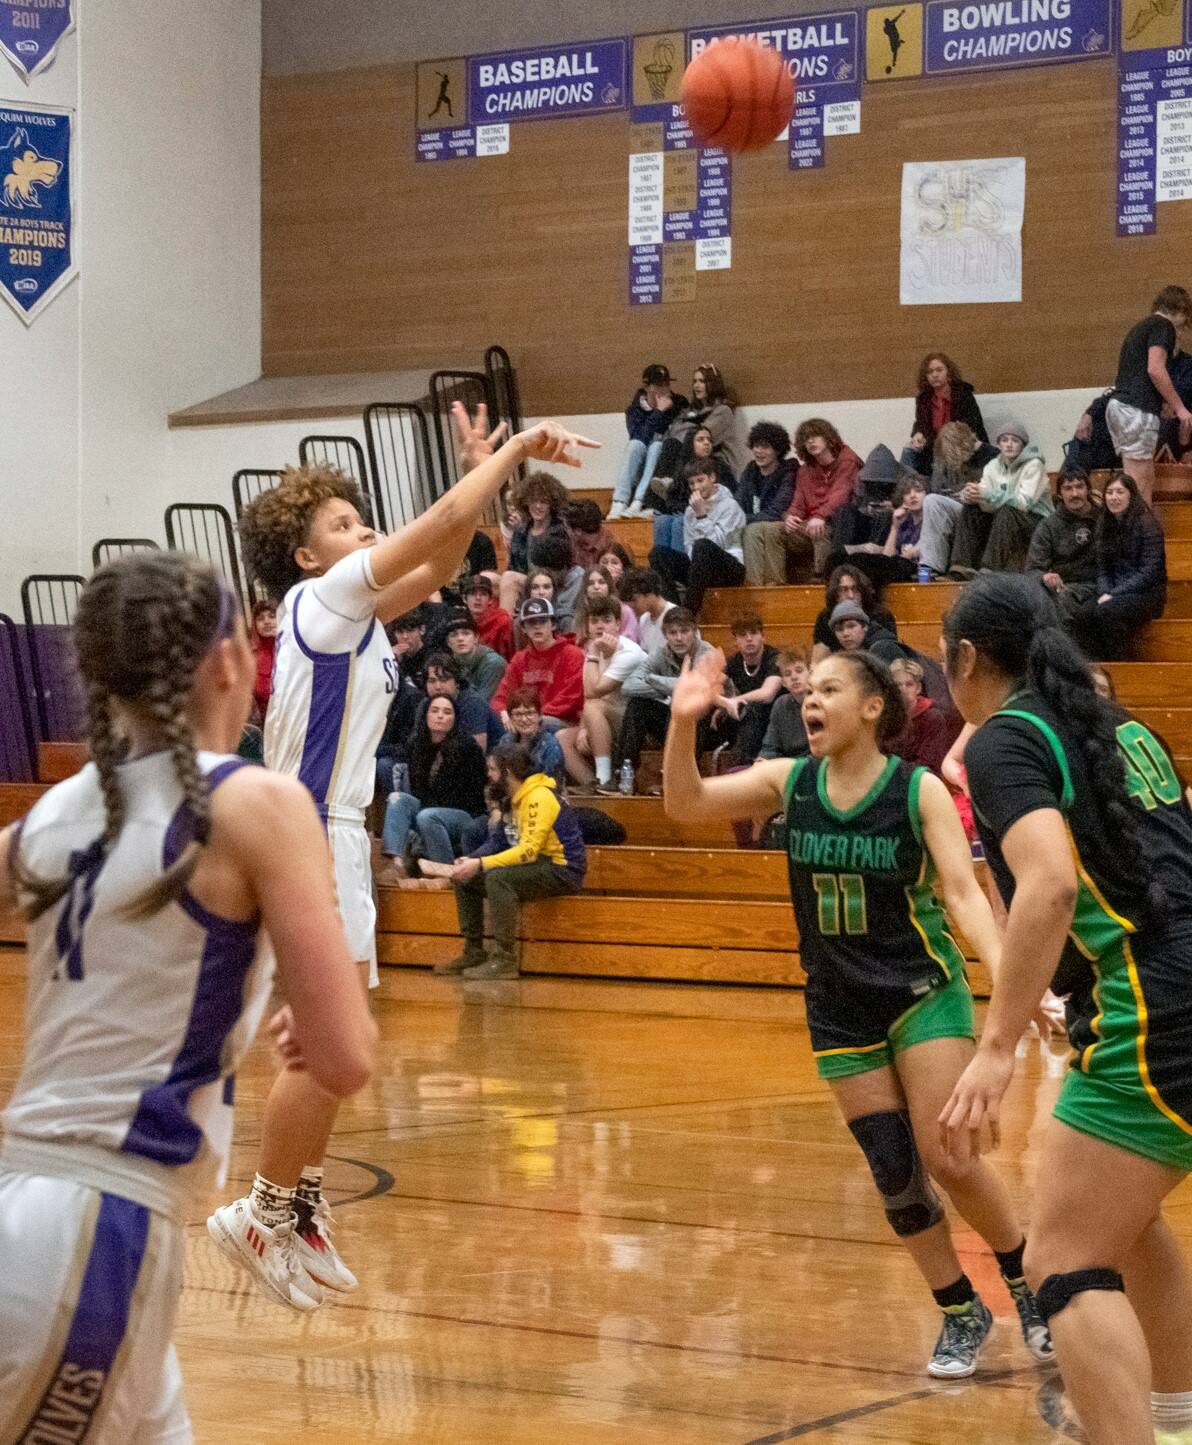 Sequim Gazette photos by Emily Matthiessen
Sequim guard Bobbi Mixon puts up a shot in the Wolves’ 65-29 win over Clover Park on Feb. 14. Mixon sank two 3-pointers in the win.